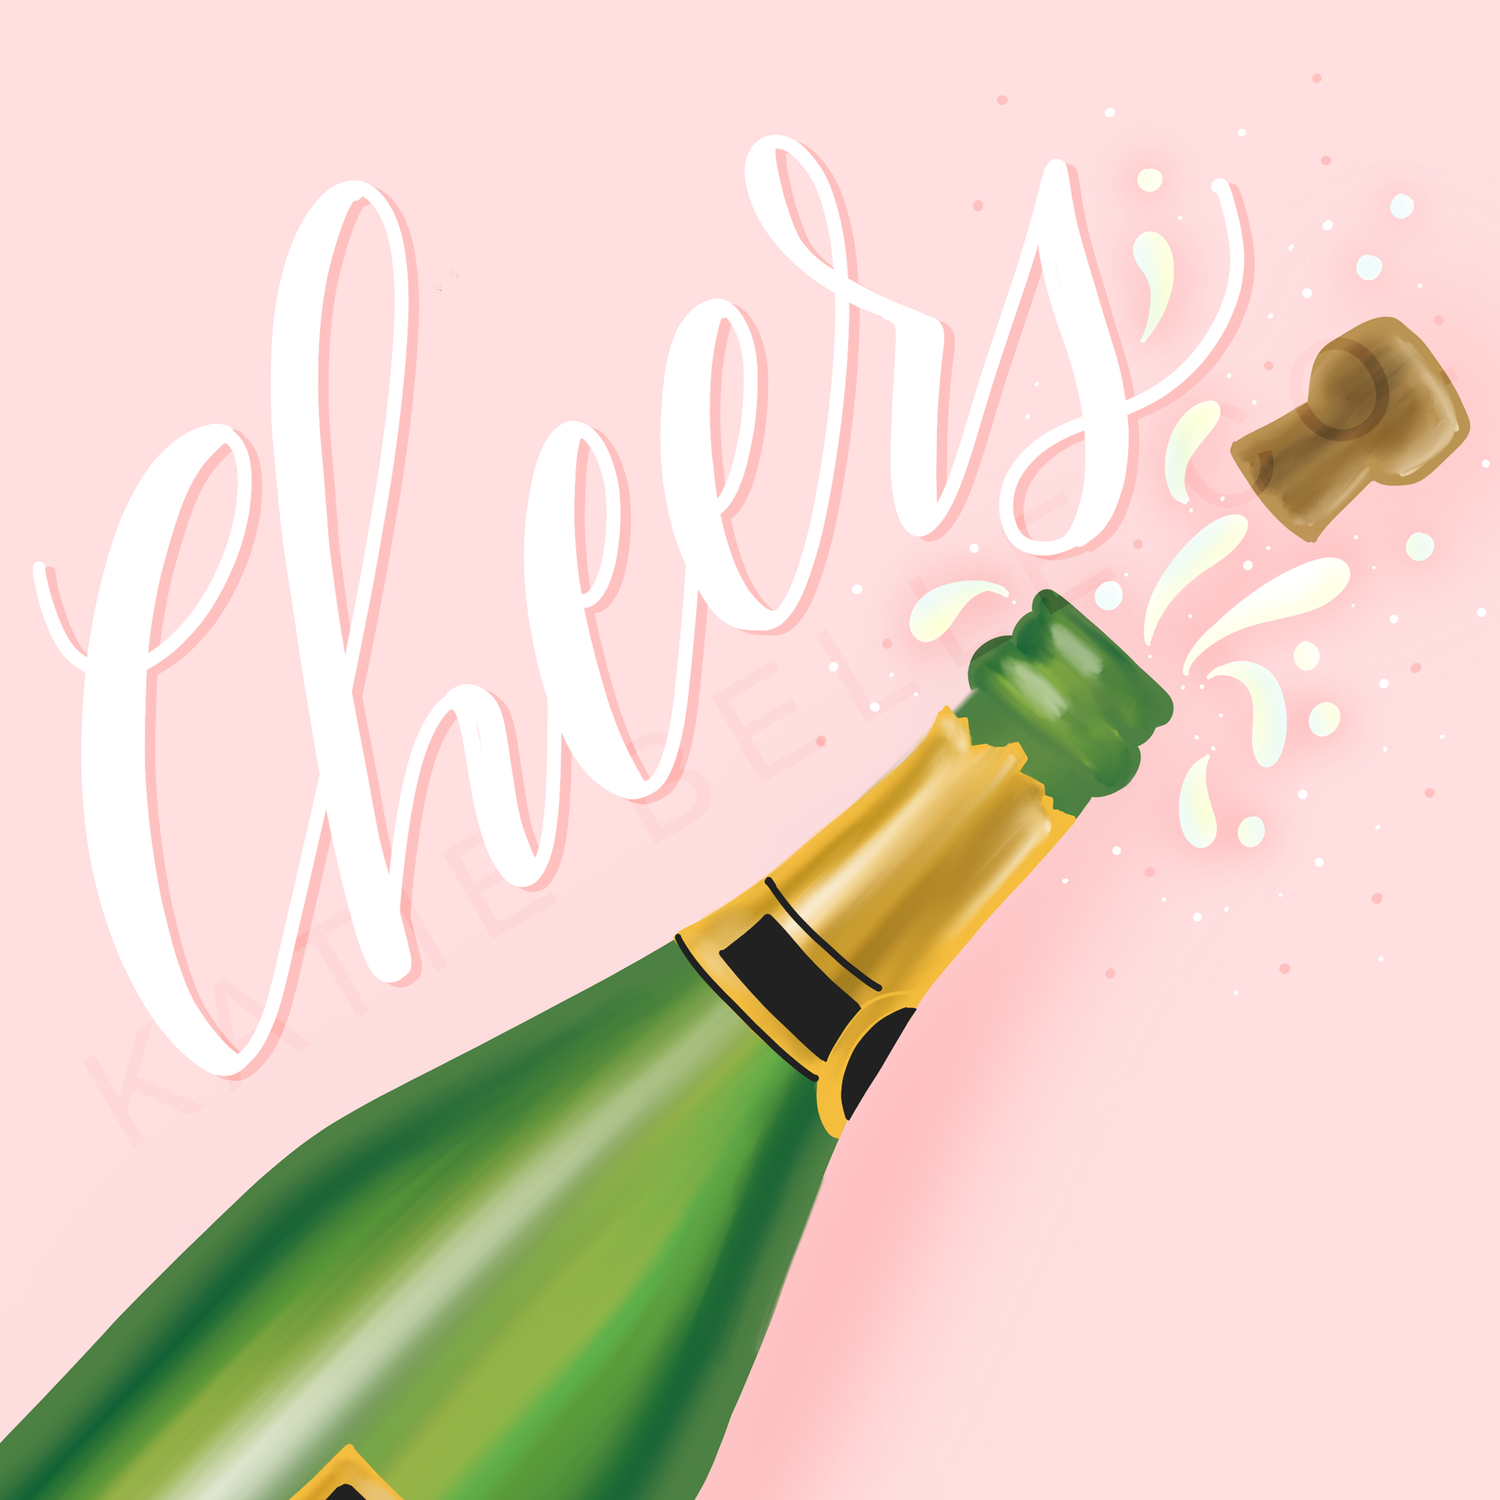 Cheers, cheers greeting card, celebration greeting card, popping champagne bottle. katie belle co. congratulations greeting card